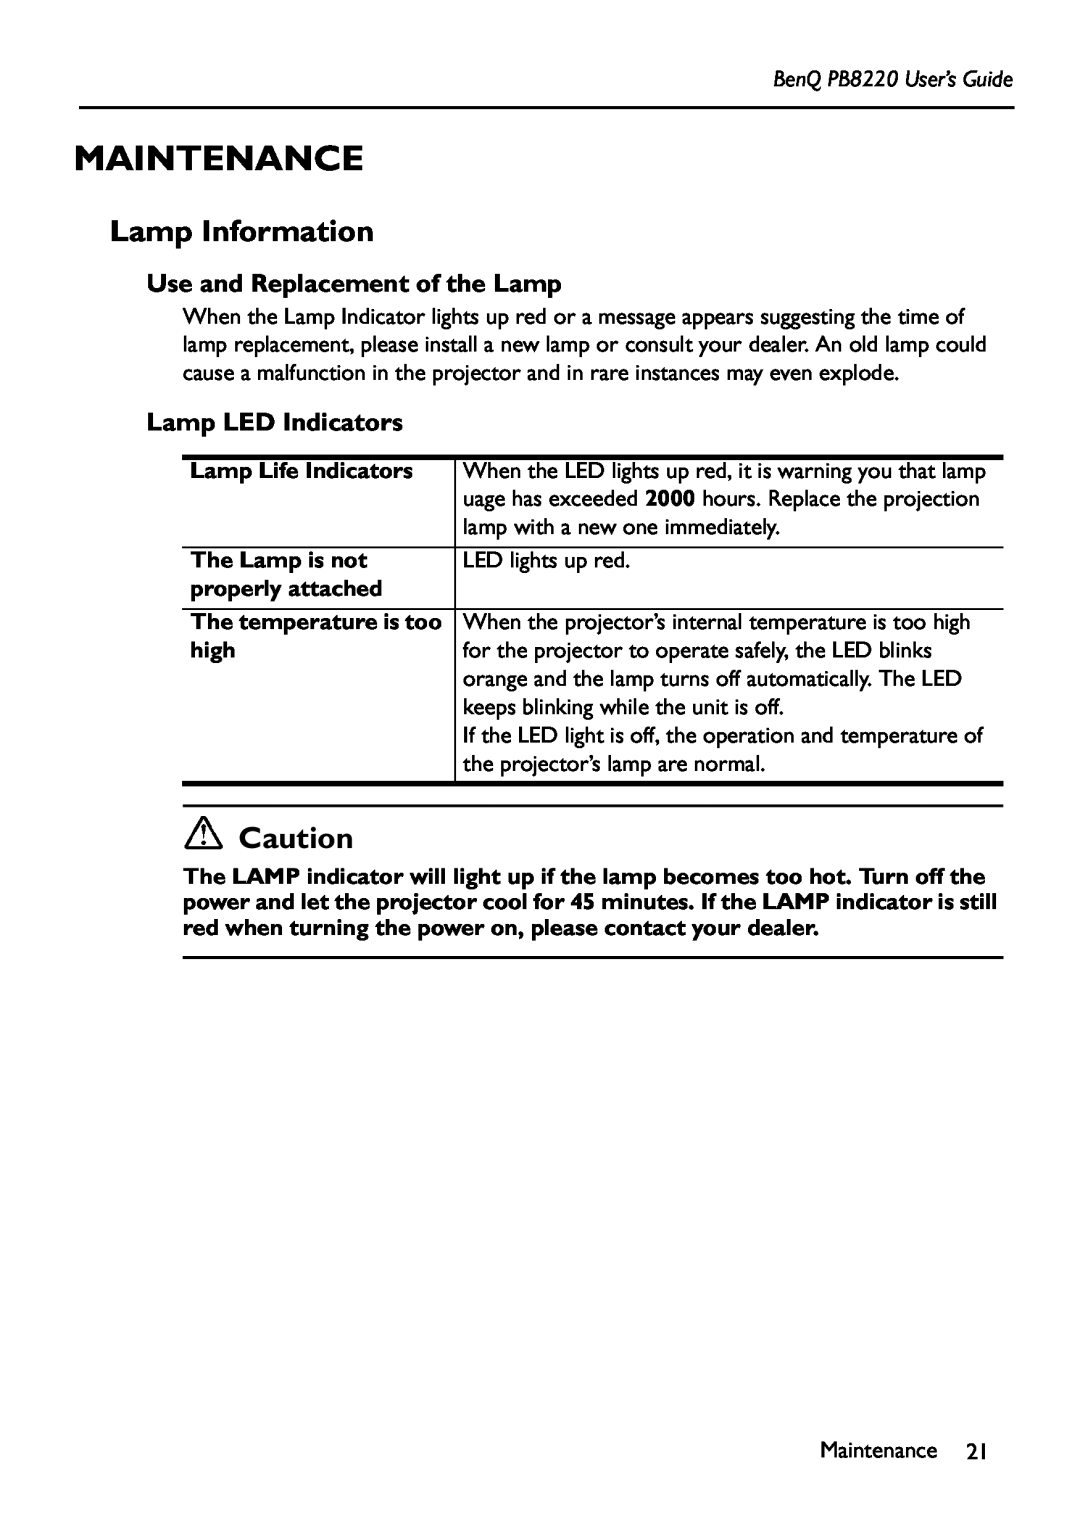 Acer Maintenance, Lamp Information, Use and Replacement of the Lamp, Lamp LED Indicators, BenQ PB8220 User’s Guide 